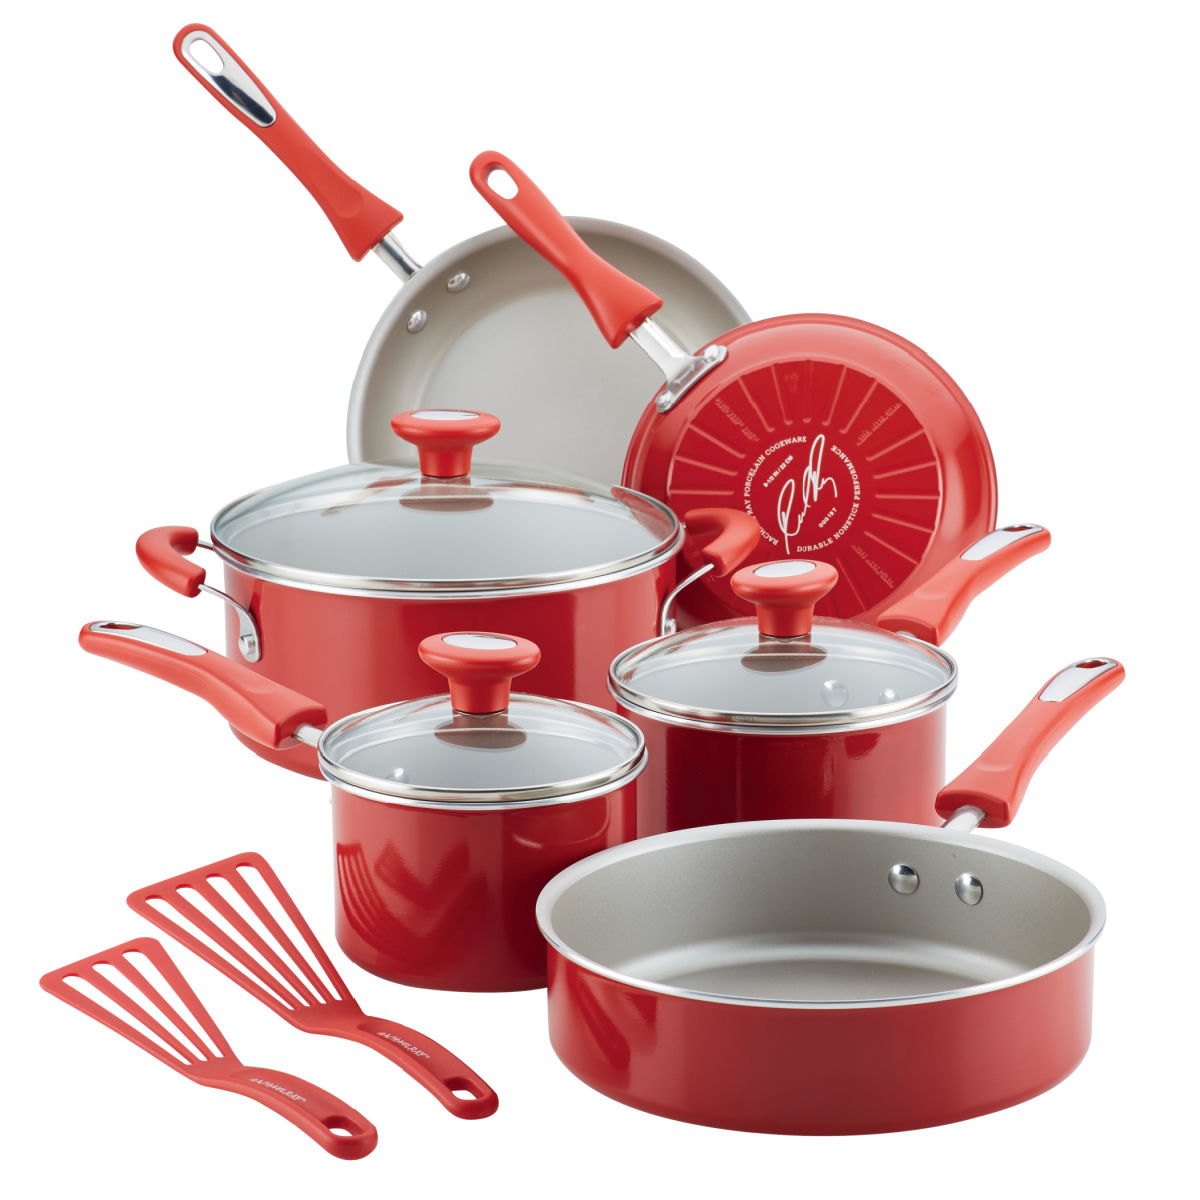 Rachael Ray 11-Piece Get Cooking! Pots and Pans Cookware Set